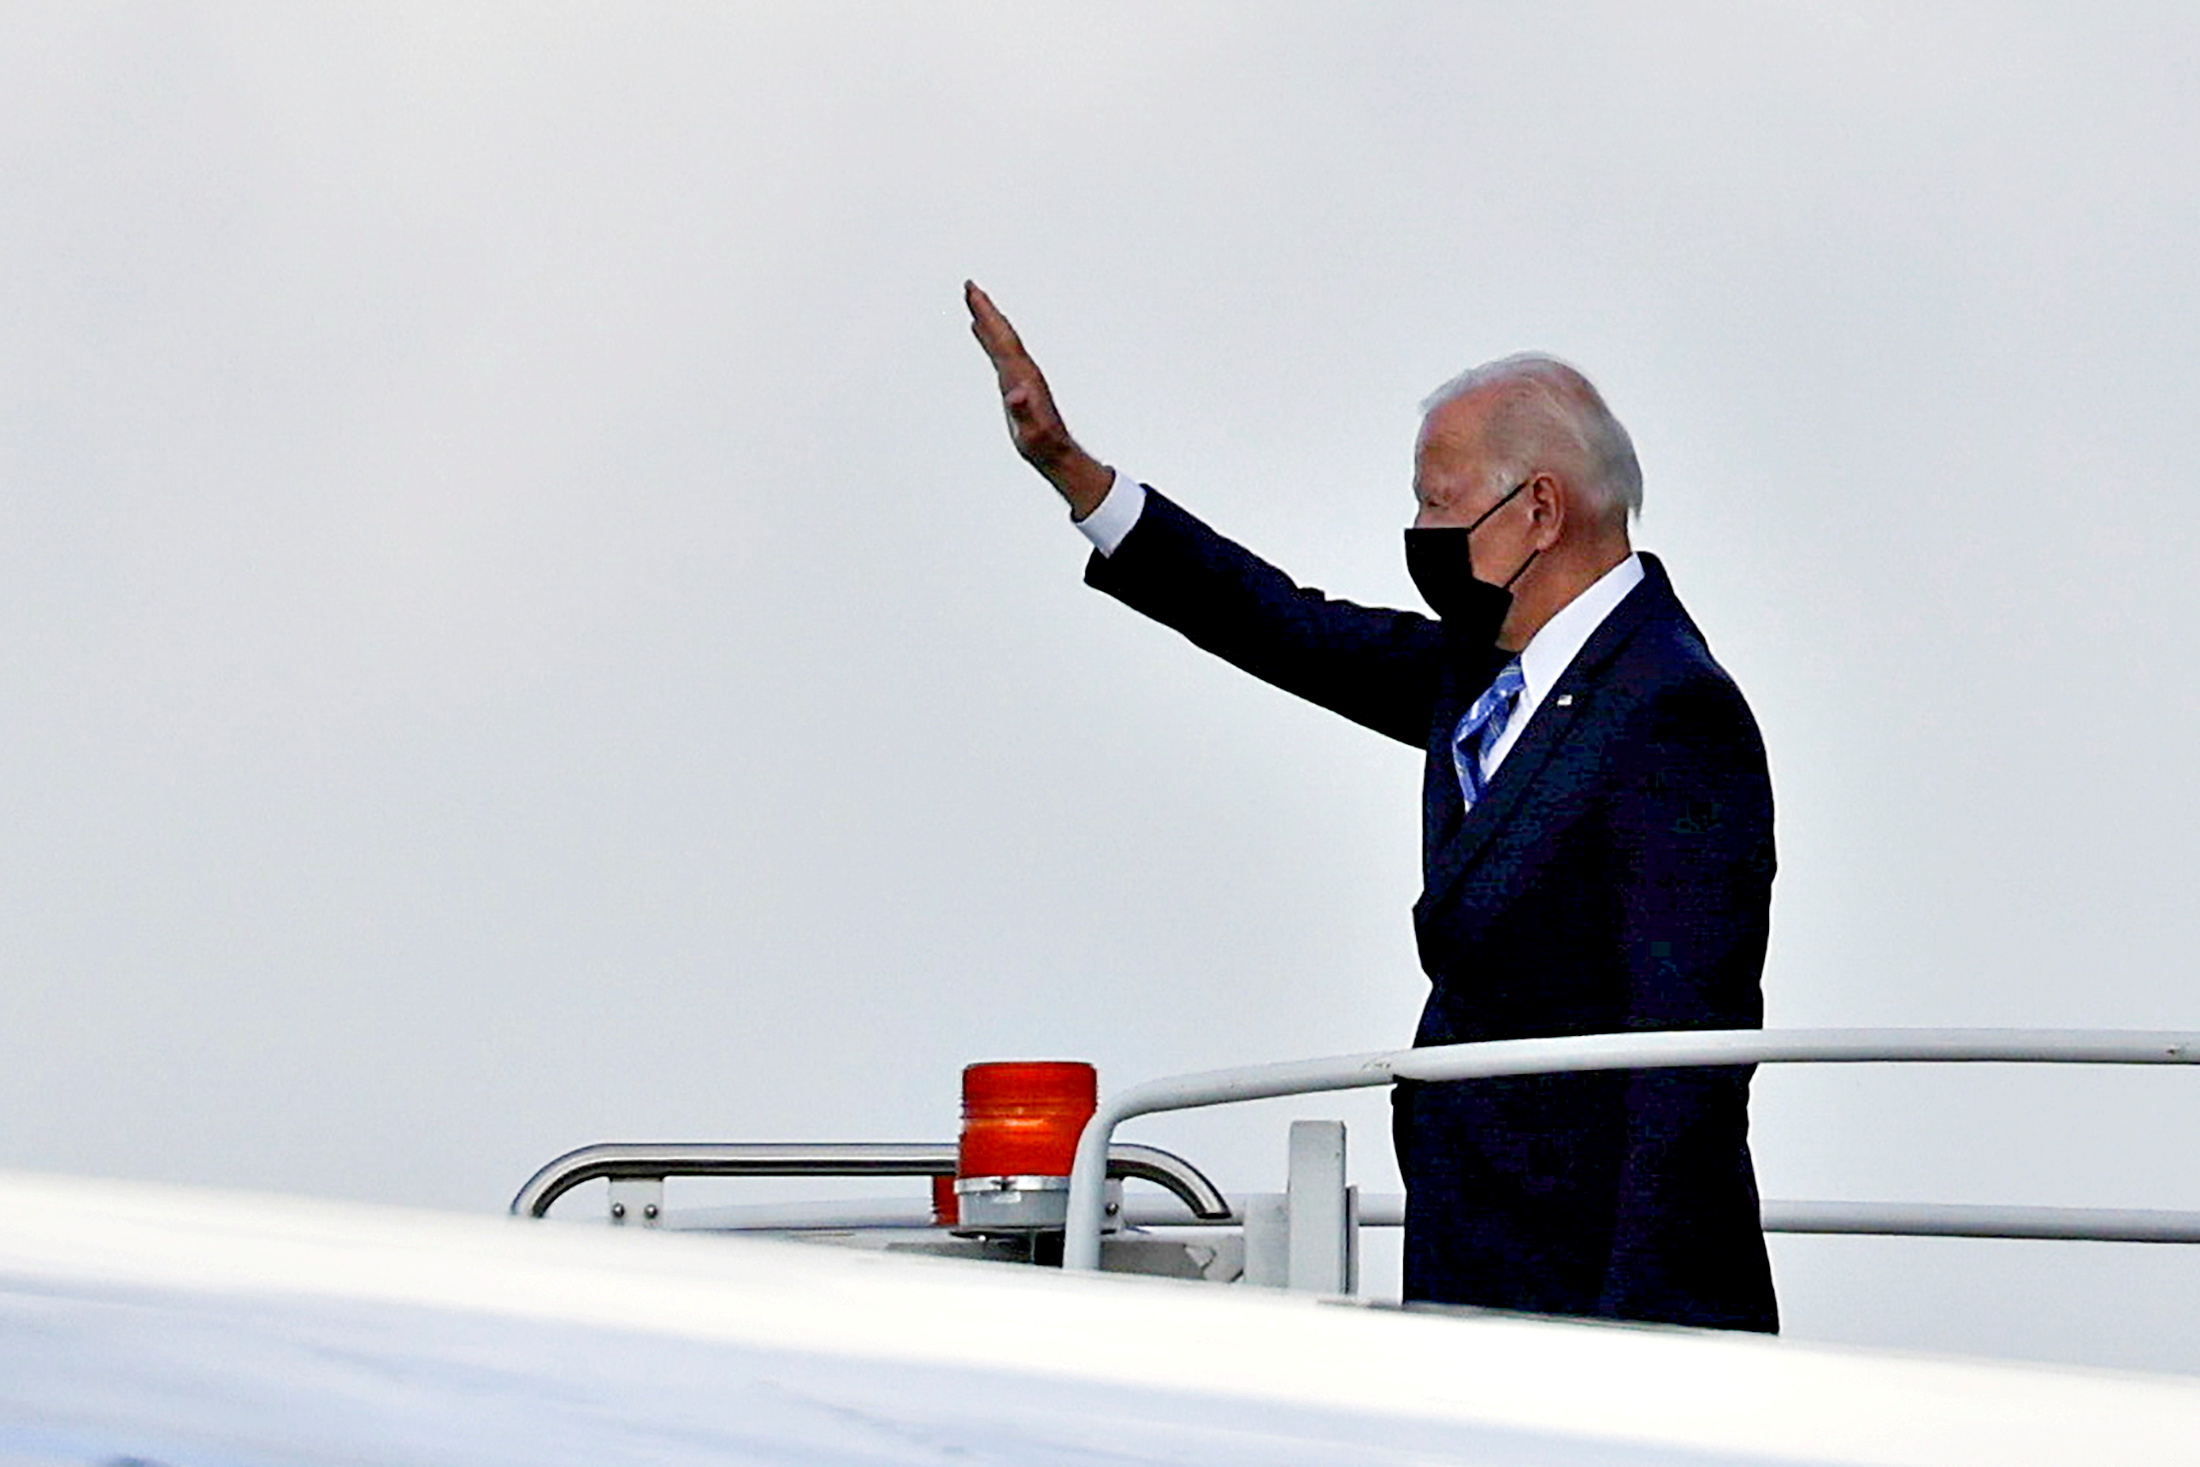 U.S. President Joe Biden waves as he boards Air Force One to depart O'Hare International Airport in Chicago